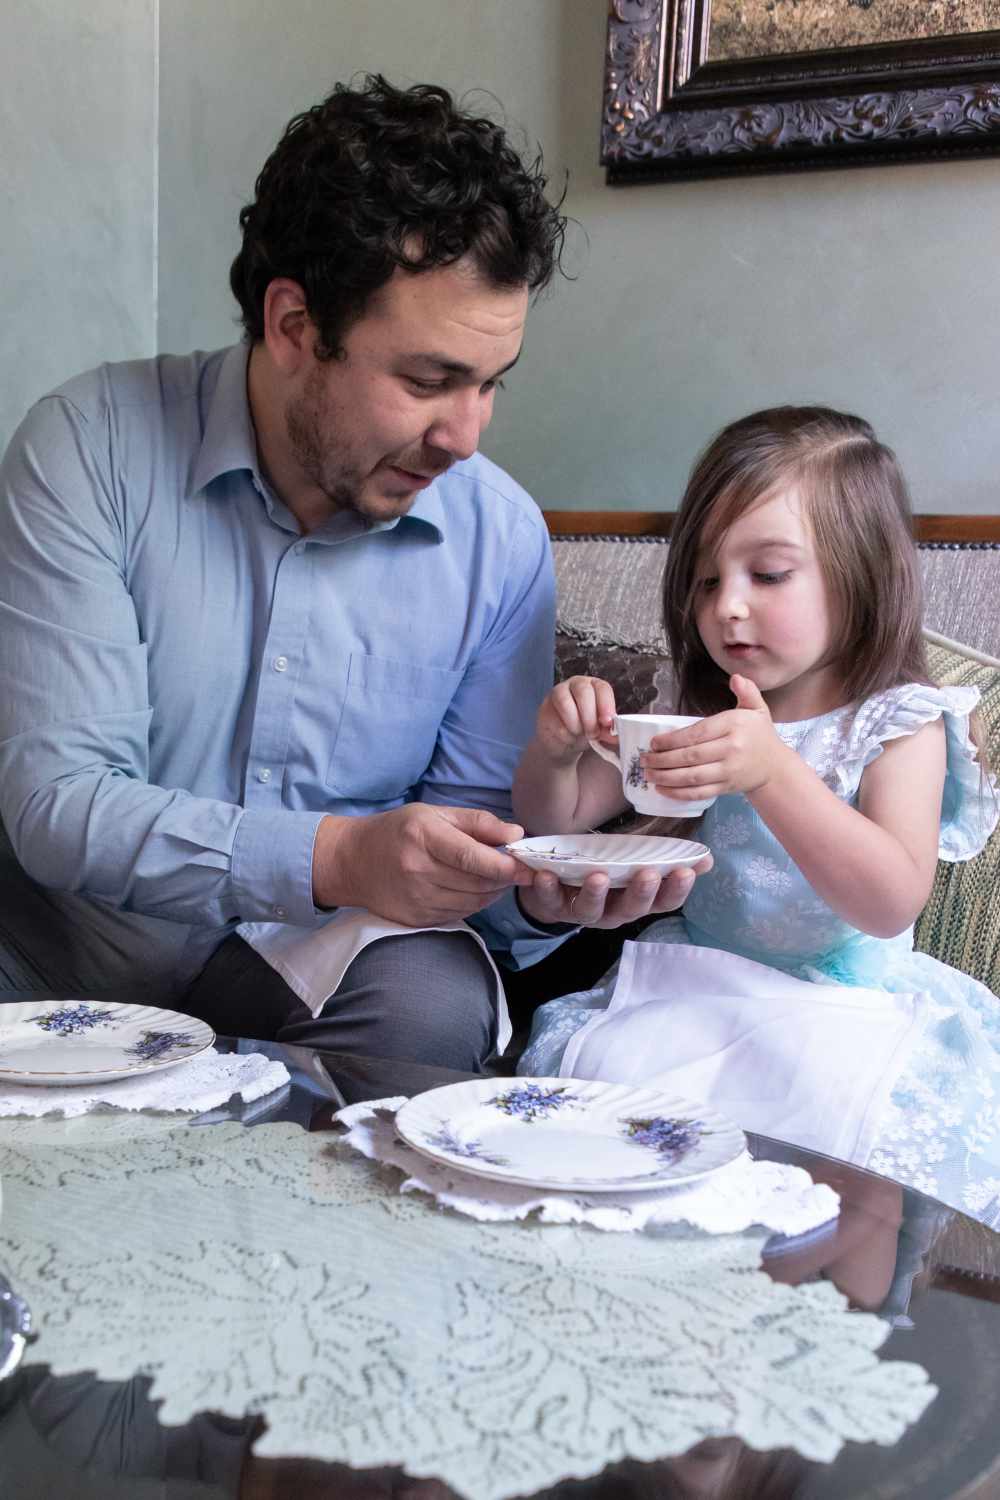 Fine Dining Albuquerque Father helping Daughter lift teacup